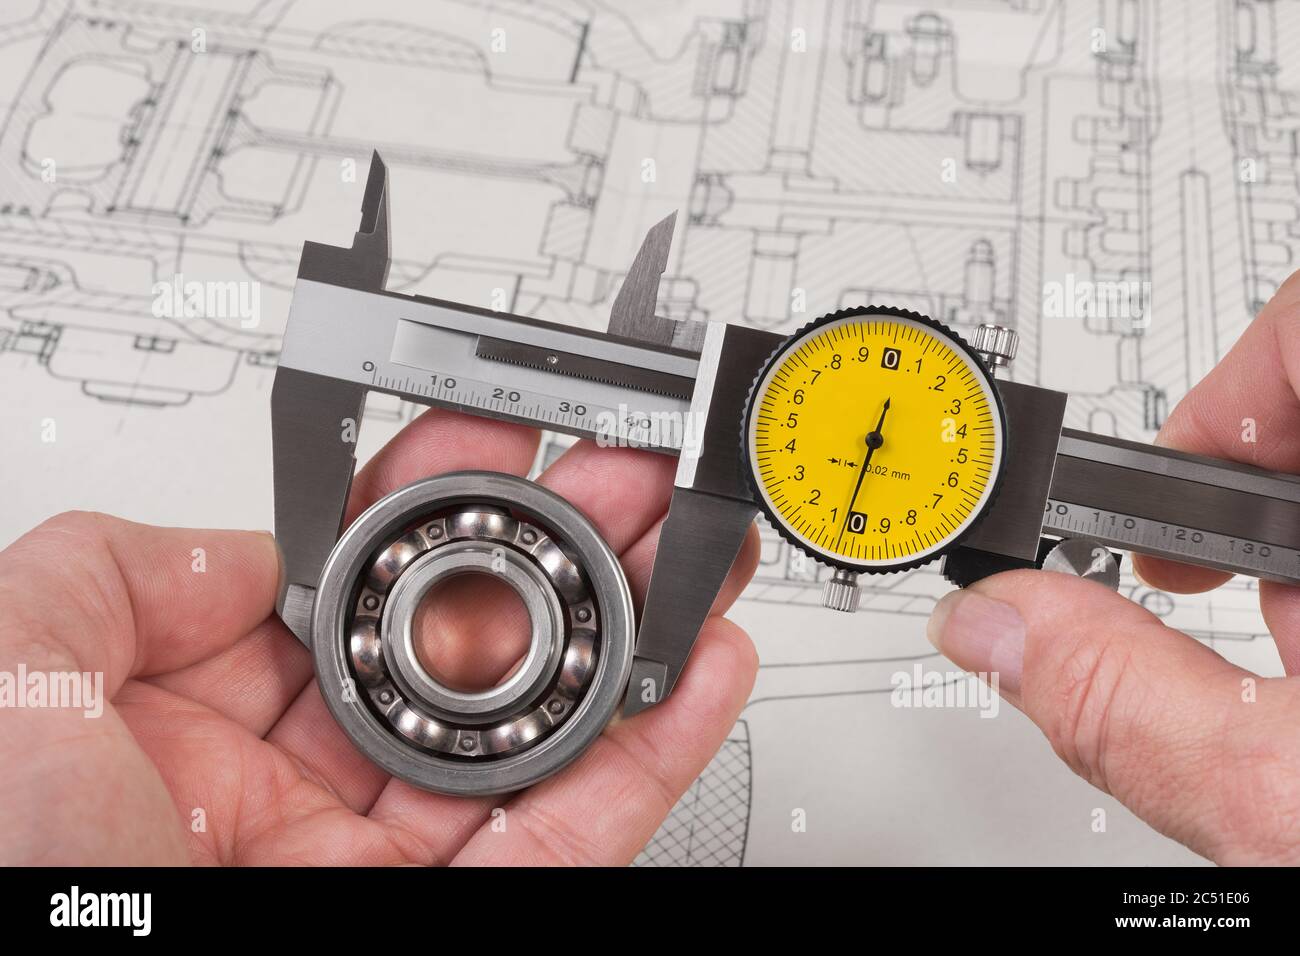 Measurement of steel ball bearing by precise analog caliper above technical drawing. Metallic measuring tool with round yellow dial in engineer hands. Stock Photo